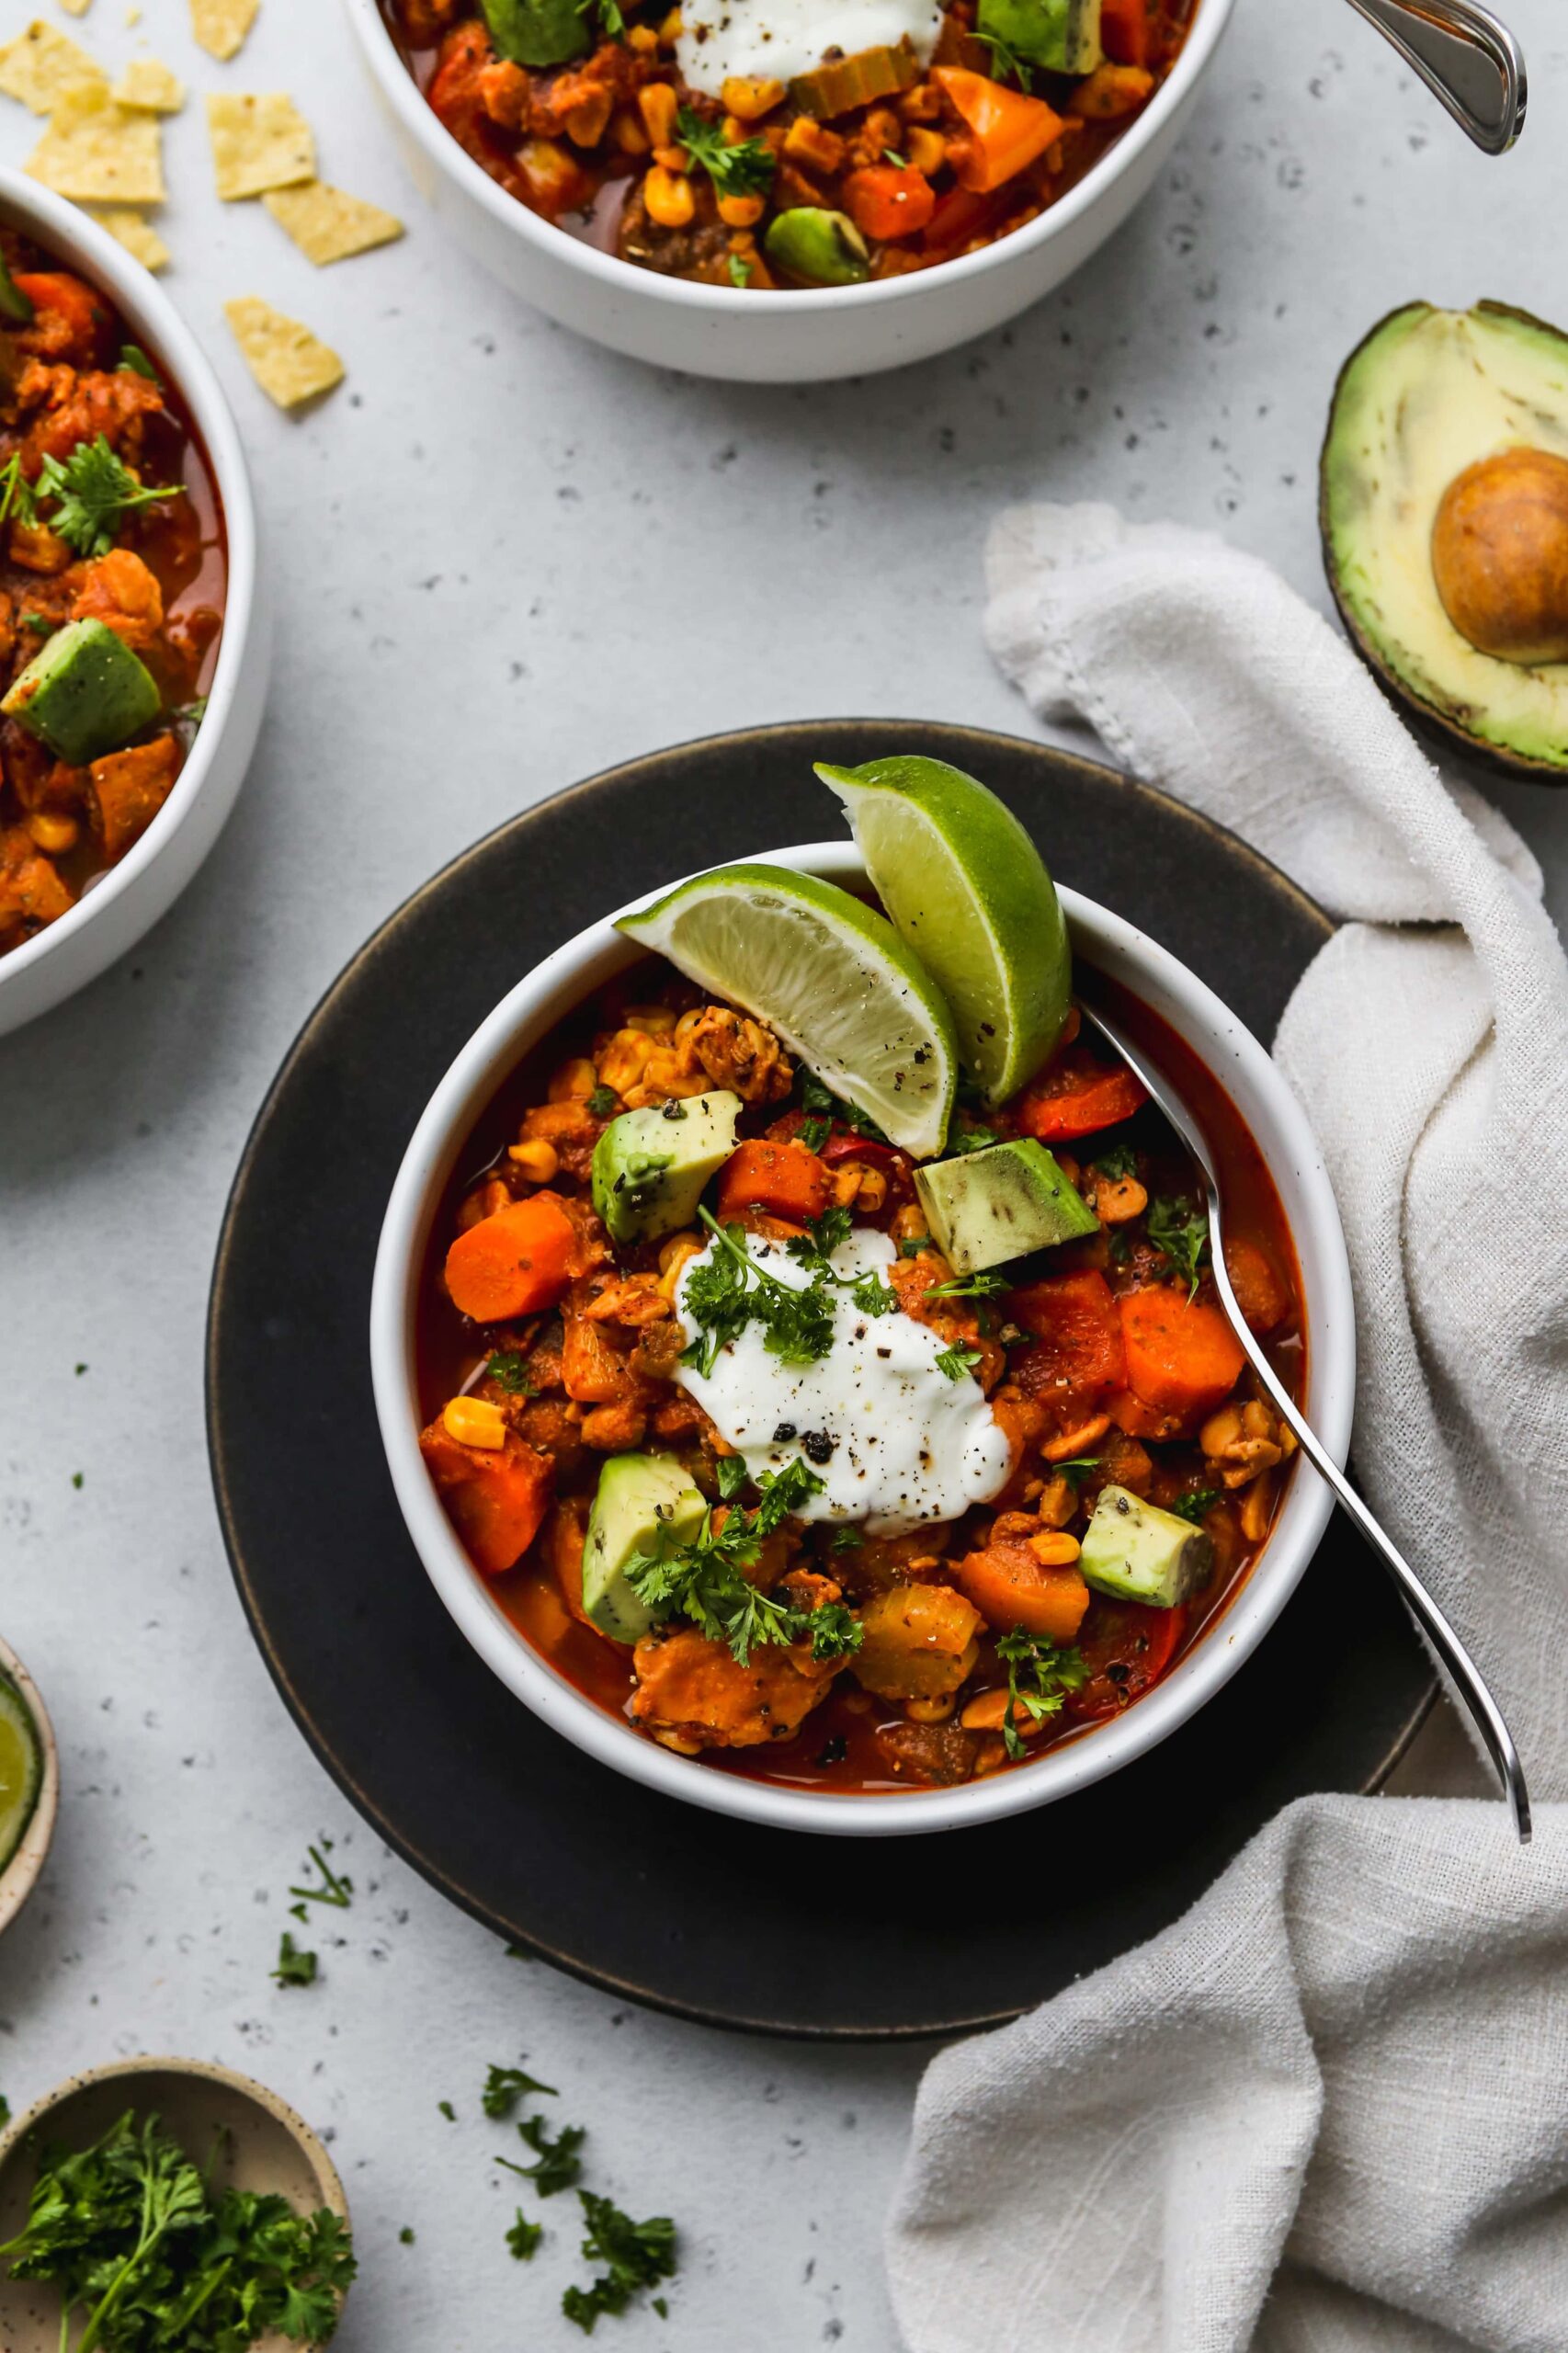  Hearty and spicy, this vegan no bean chili is sure to warm you up on a cold day!